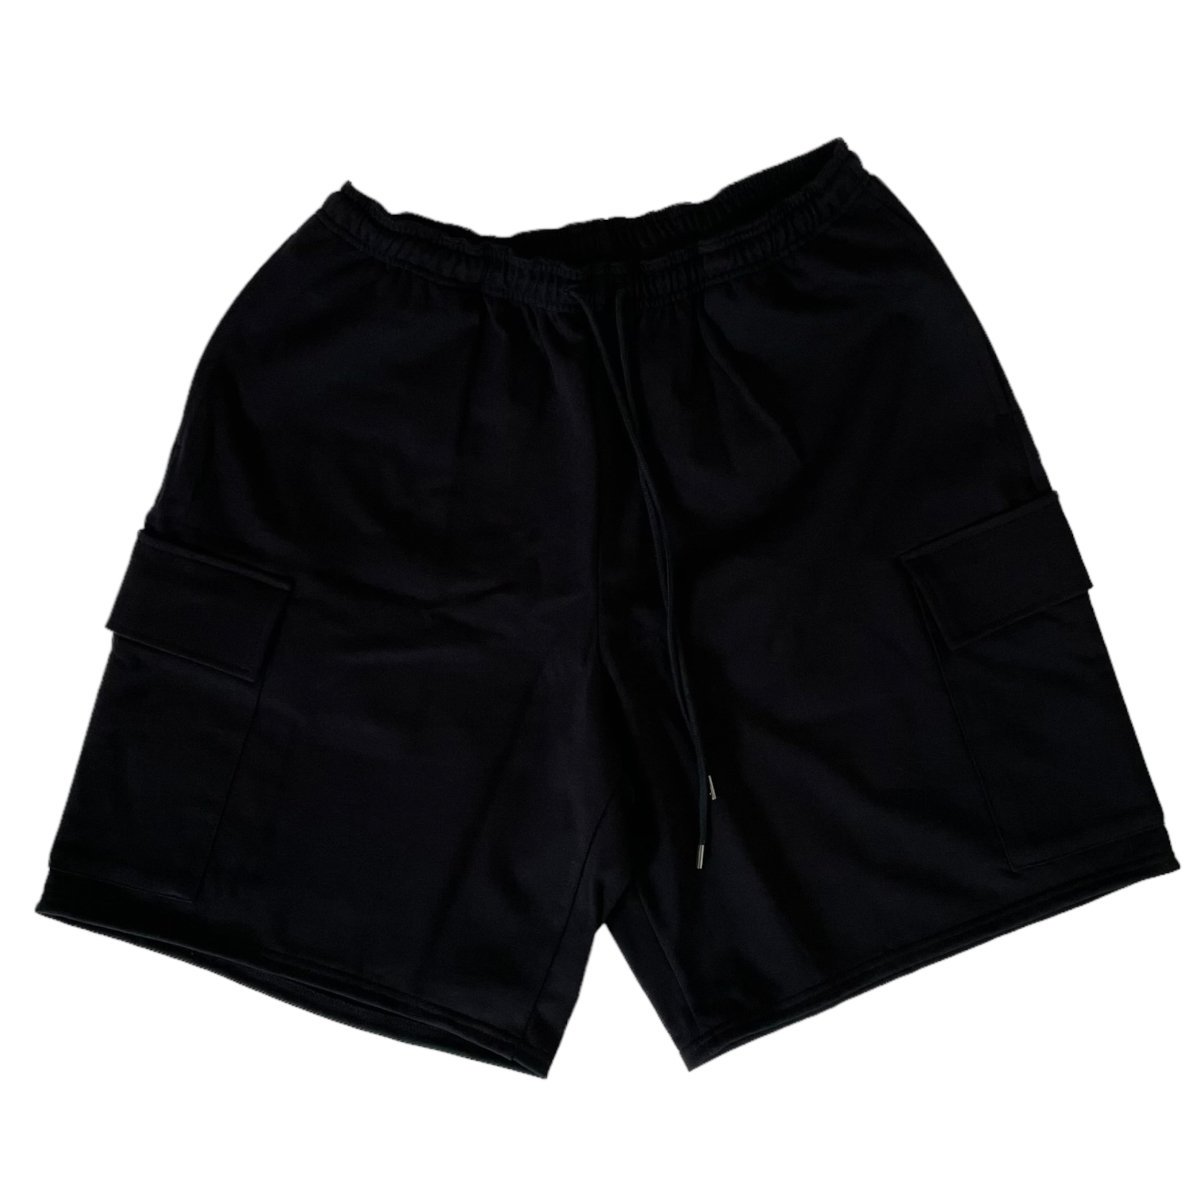 marka<BR>CARGO SHORTS - 20/1 RECYCLE SUVIN ORGANIC COTTON KNIT -(BLACK)